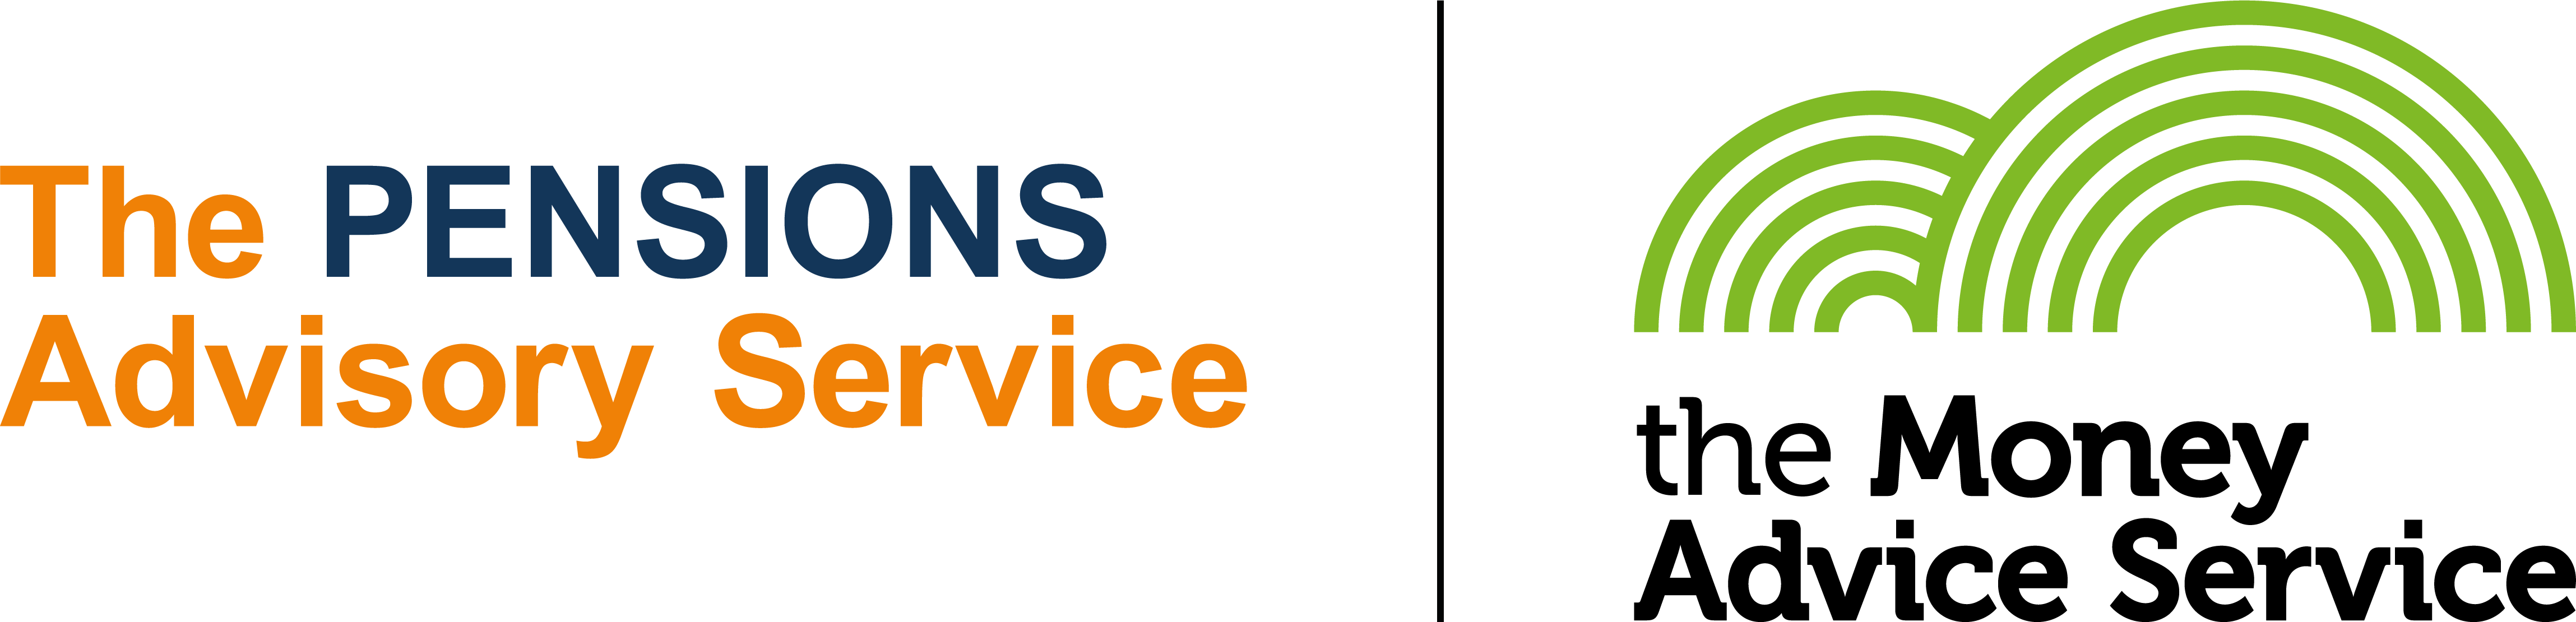 The Pensions Advisory Service and Money Advice Service logos